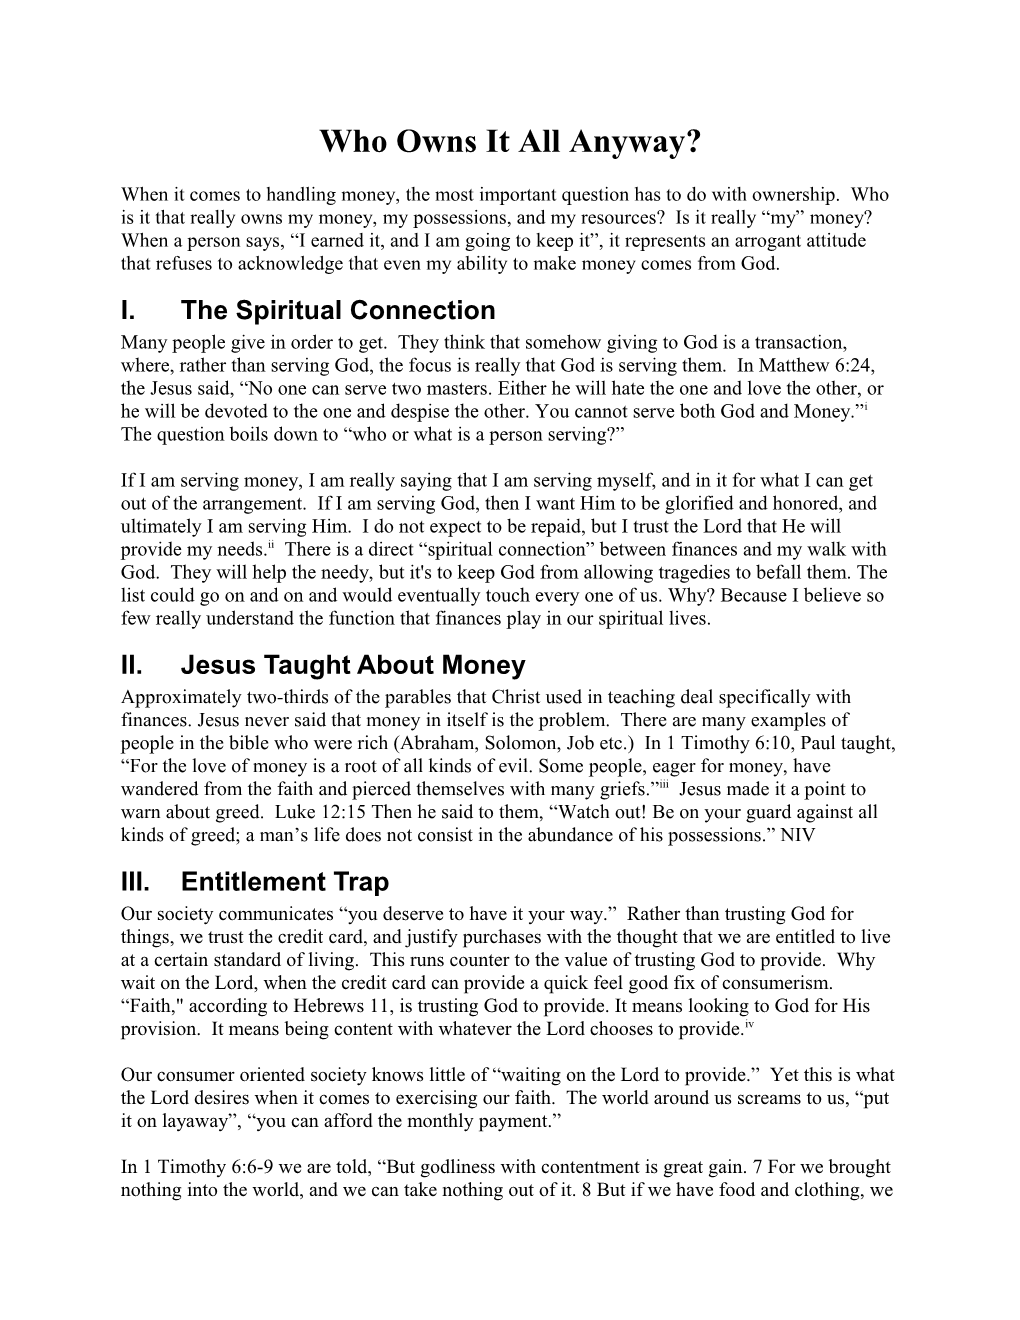 Finances and Your Relationship with God